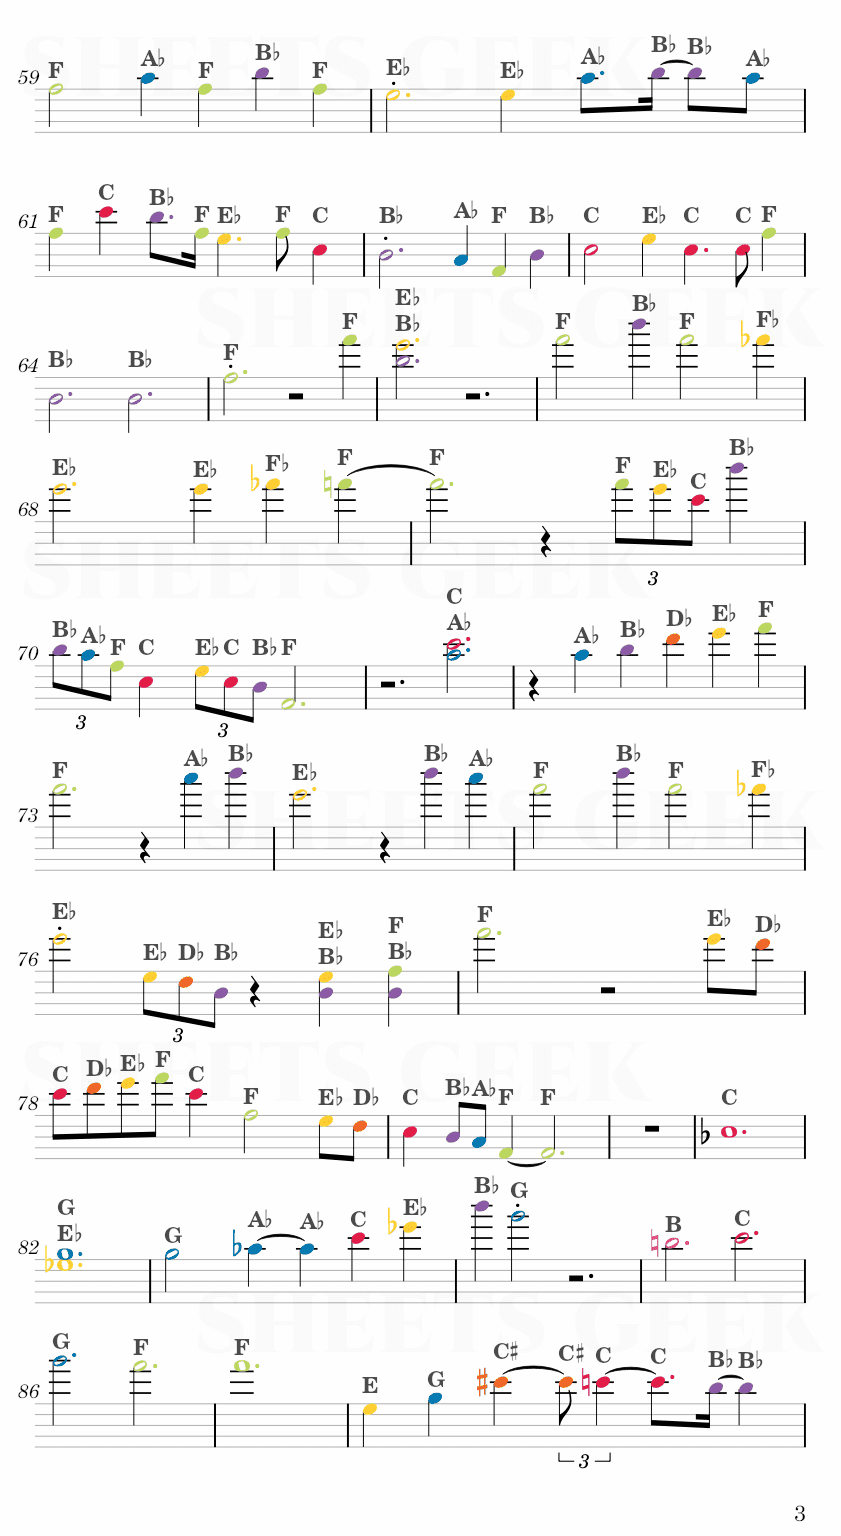 Ylang Ylang - FKJ Easy Sheet Music Free for piano, keyboard, flute, violin, sax, cello page 3